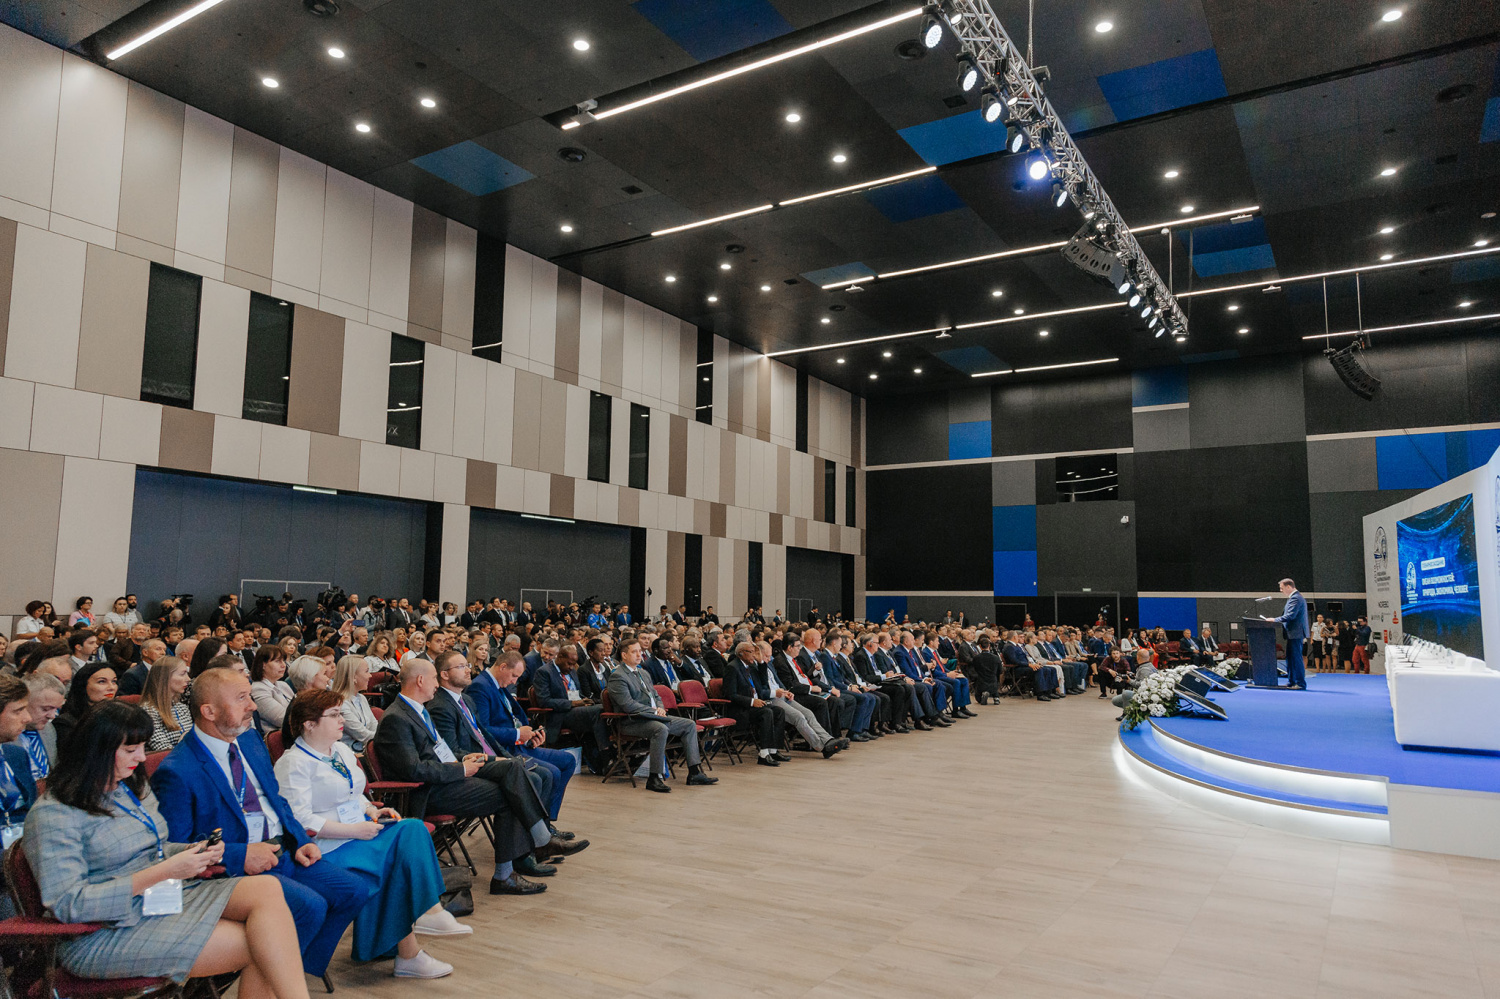 The IV Global Fishery Forum & Seafood Expo Russia is postponed to 2021